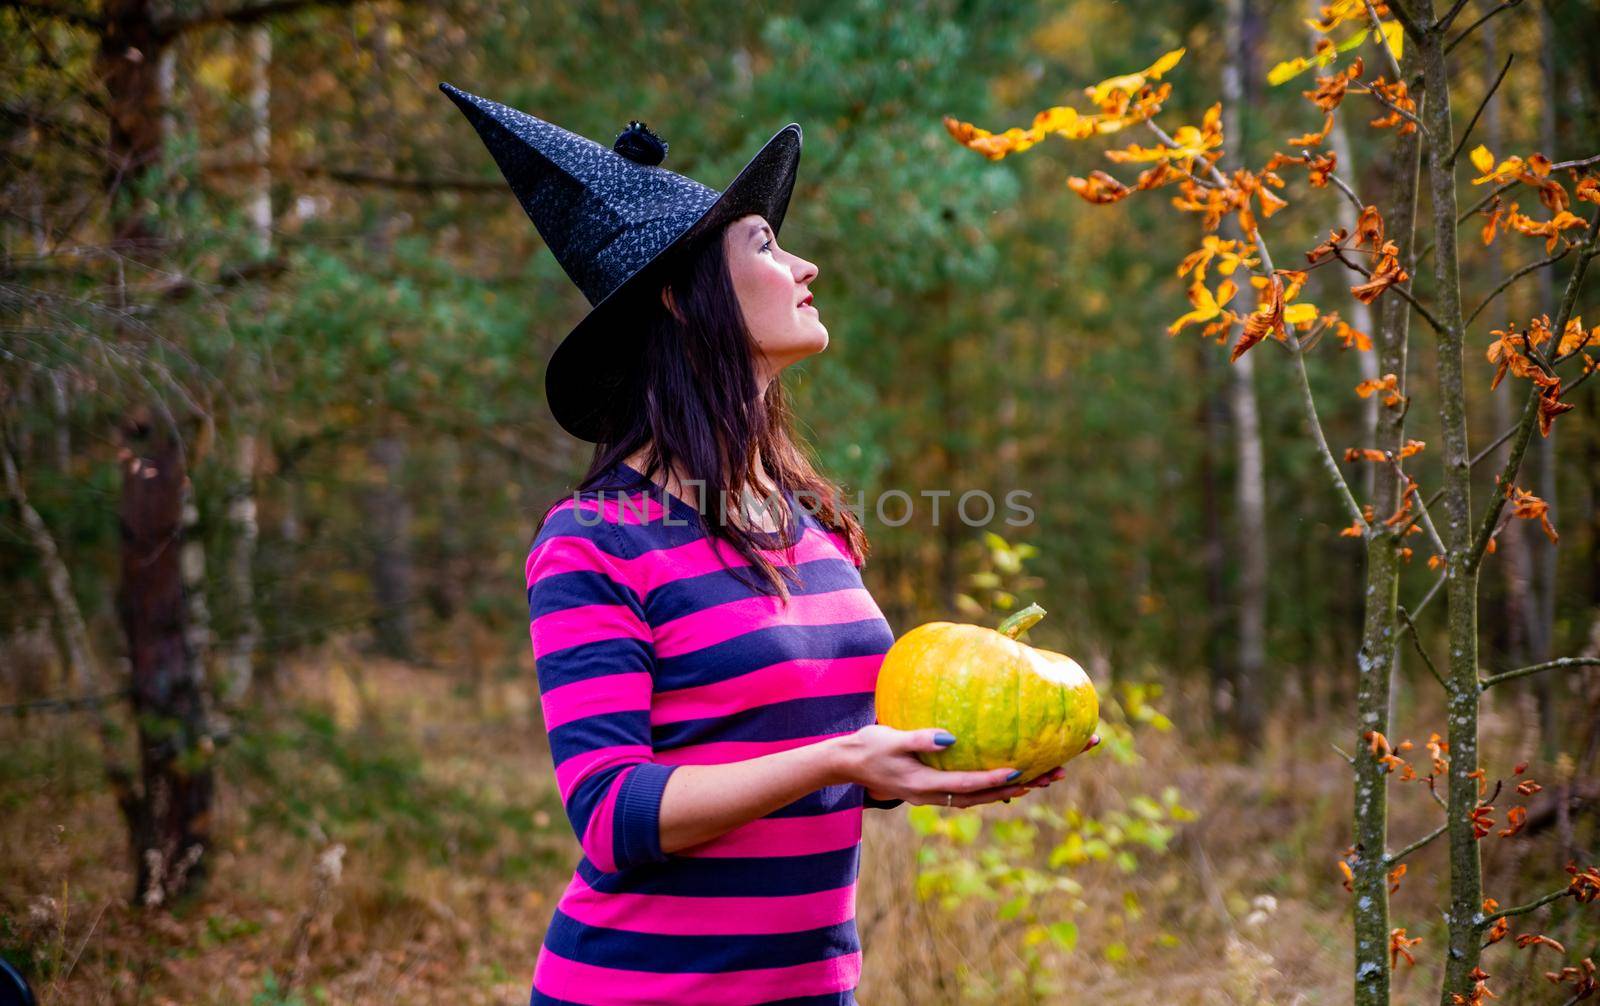 Witch with little pumpkin in autumn forest by Mariaprovector